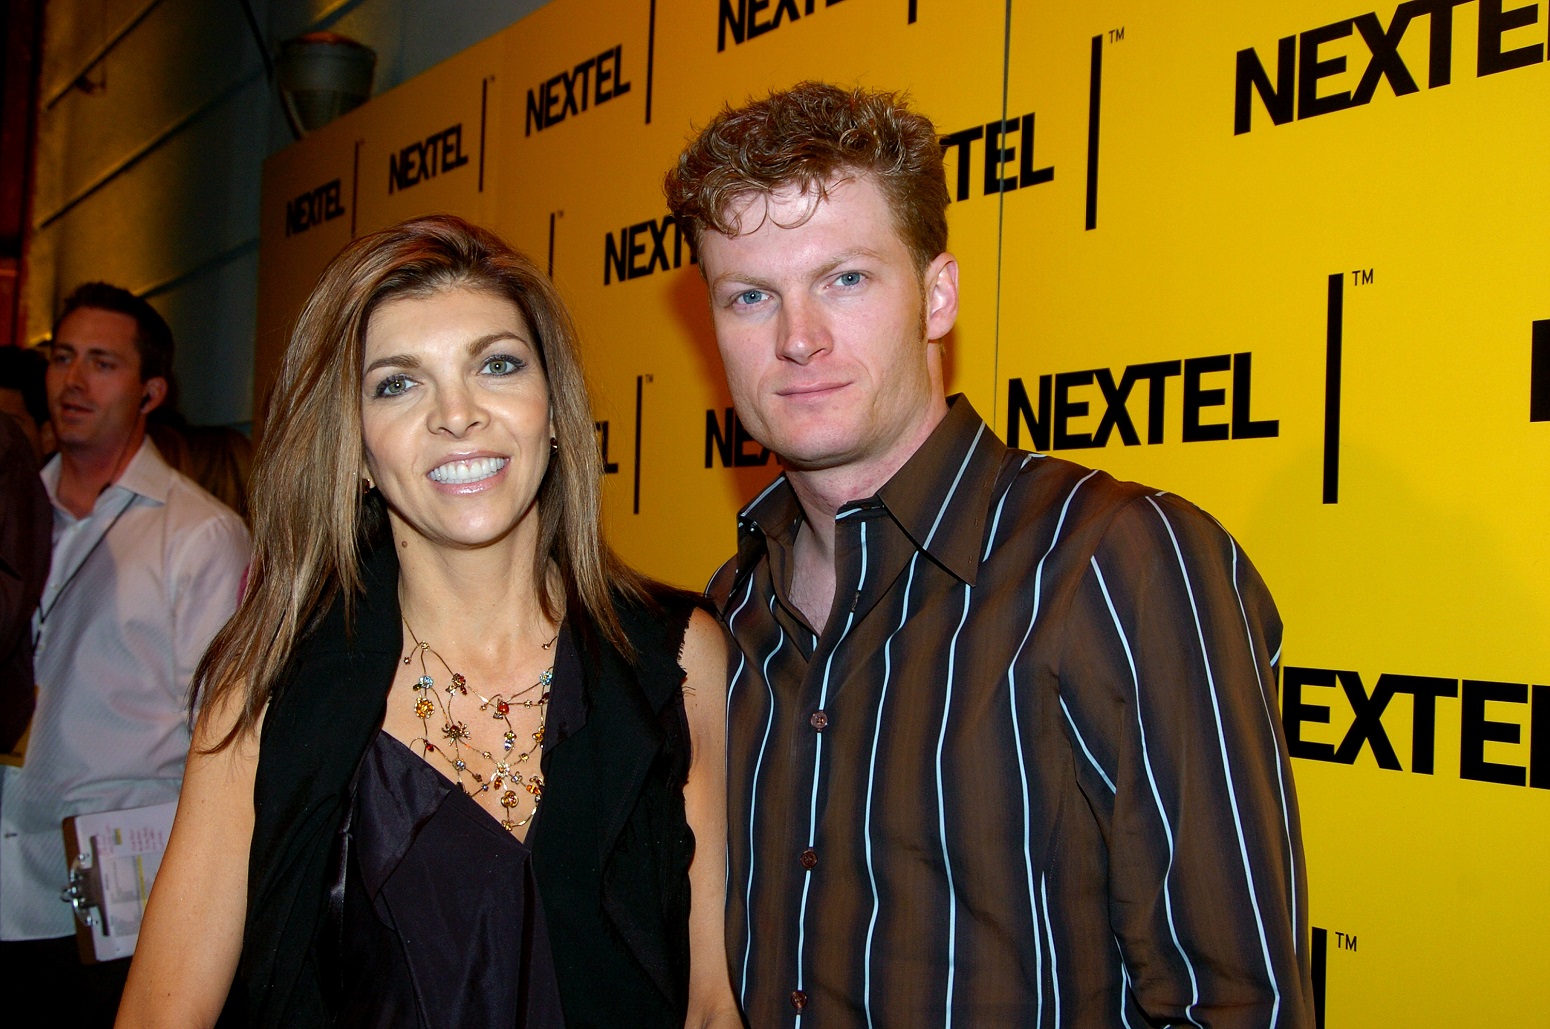 Dale Earnhardt Jr.'s stepmother ruins family business